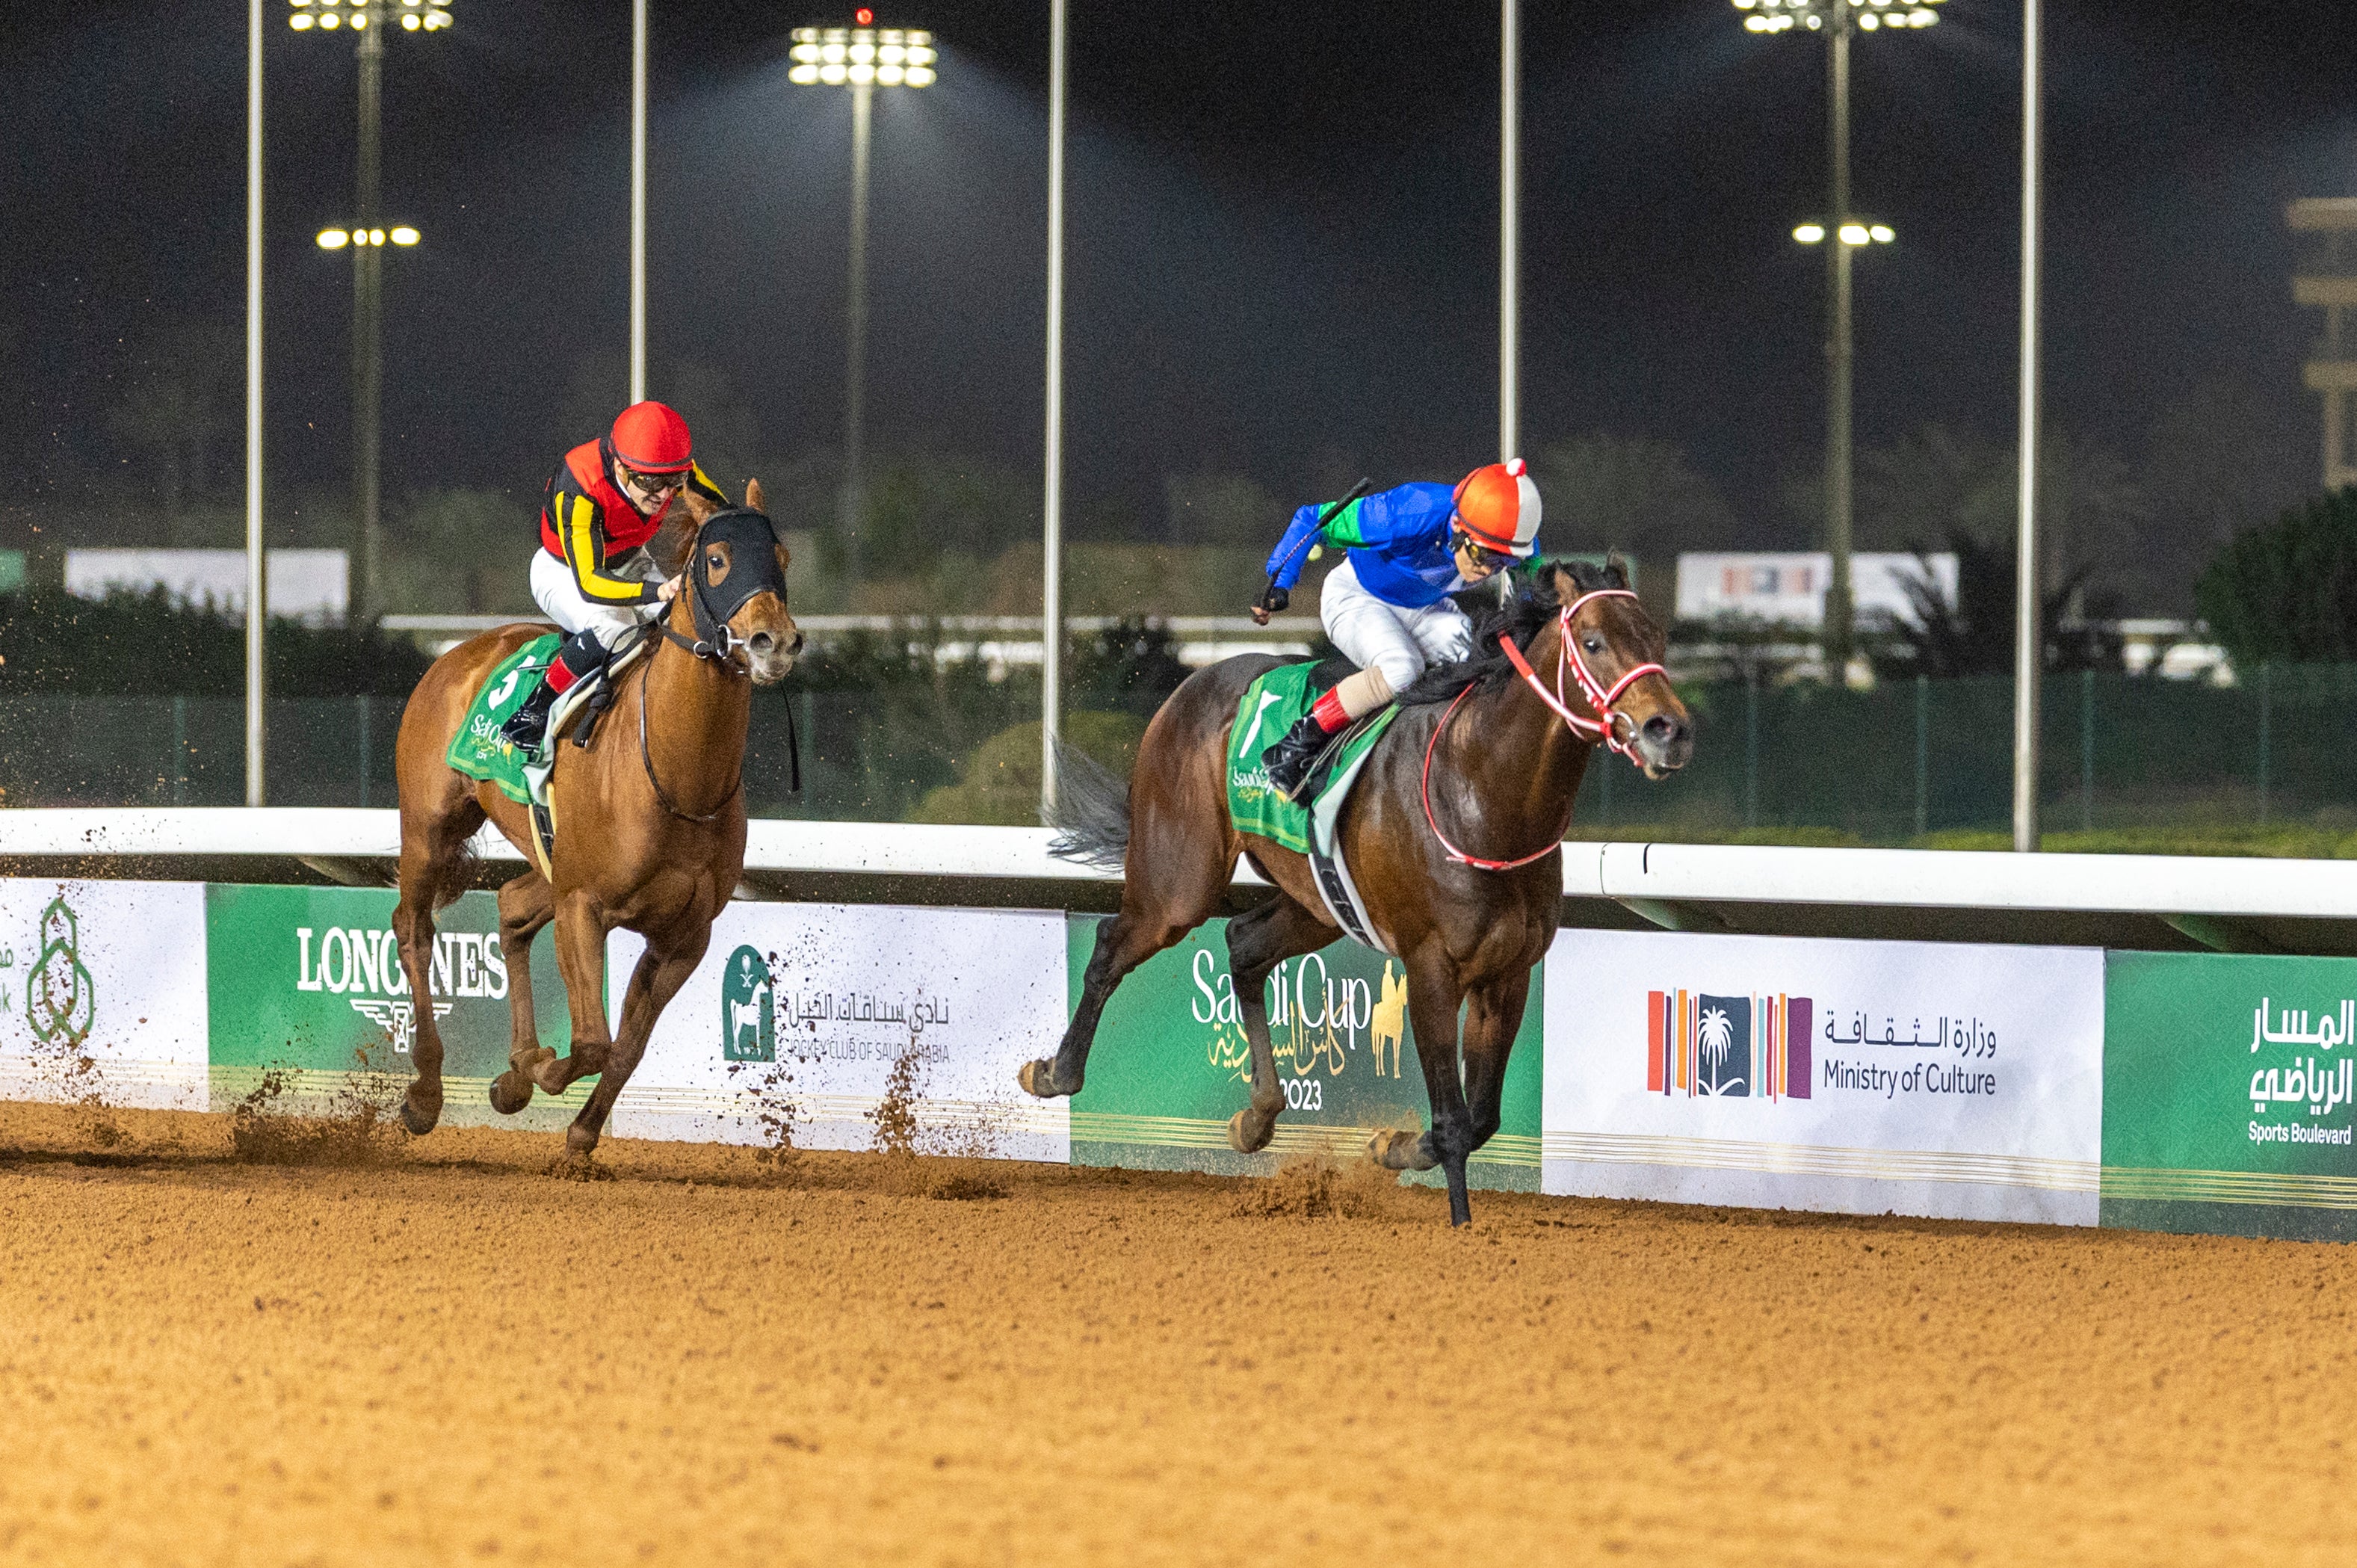 The Saudi Cup - where the world’s best horses compete for the ultimate prize